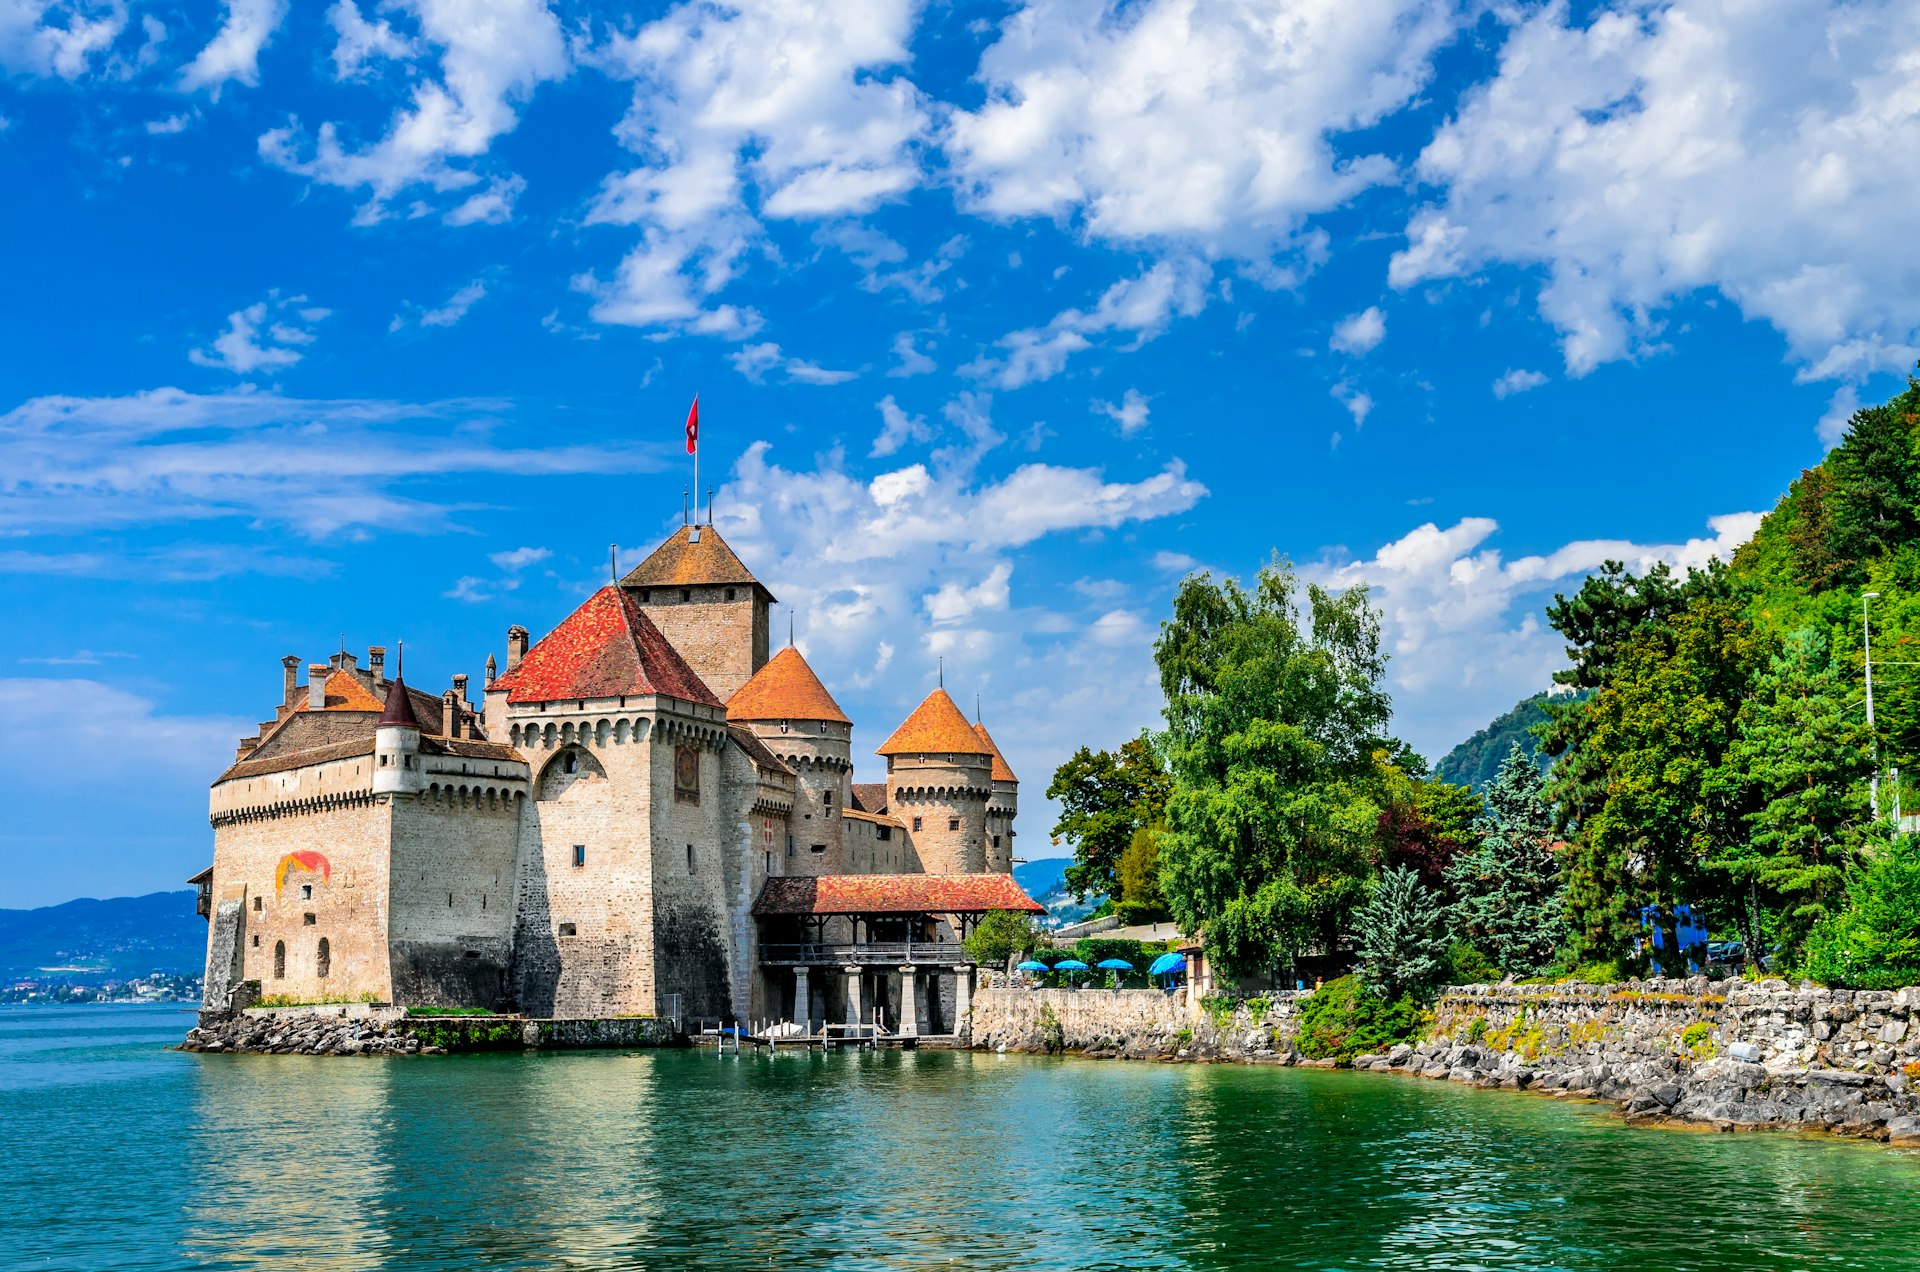 Exterior of Castle Chillon, one of the most visited castles in Switzerland.